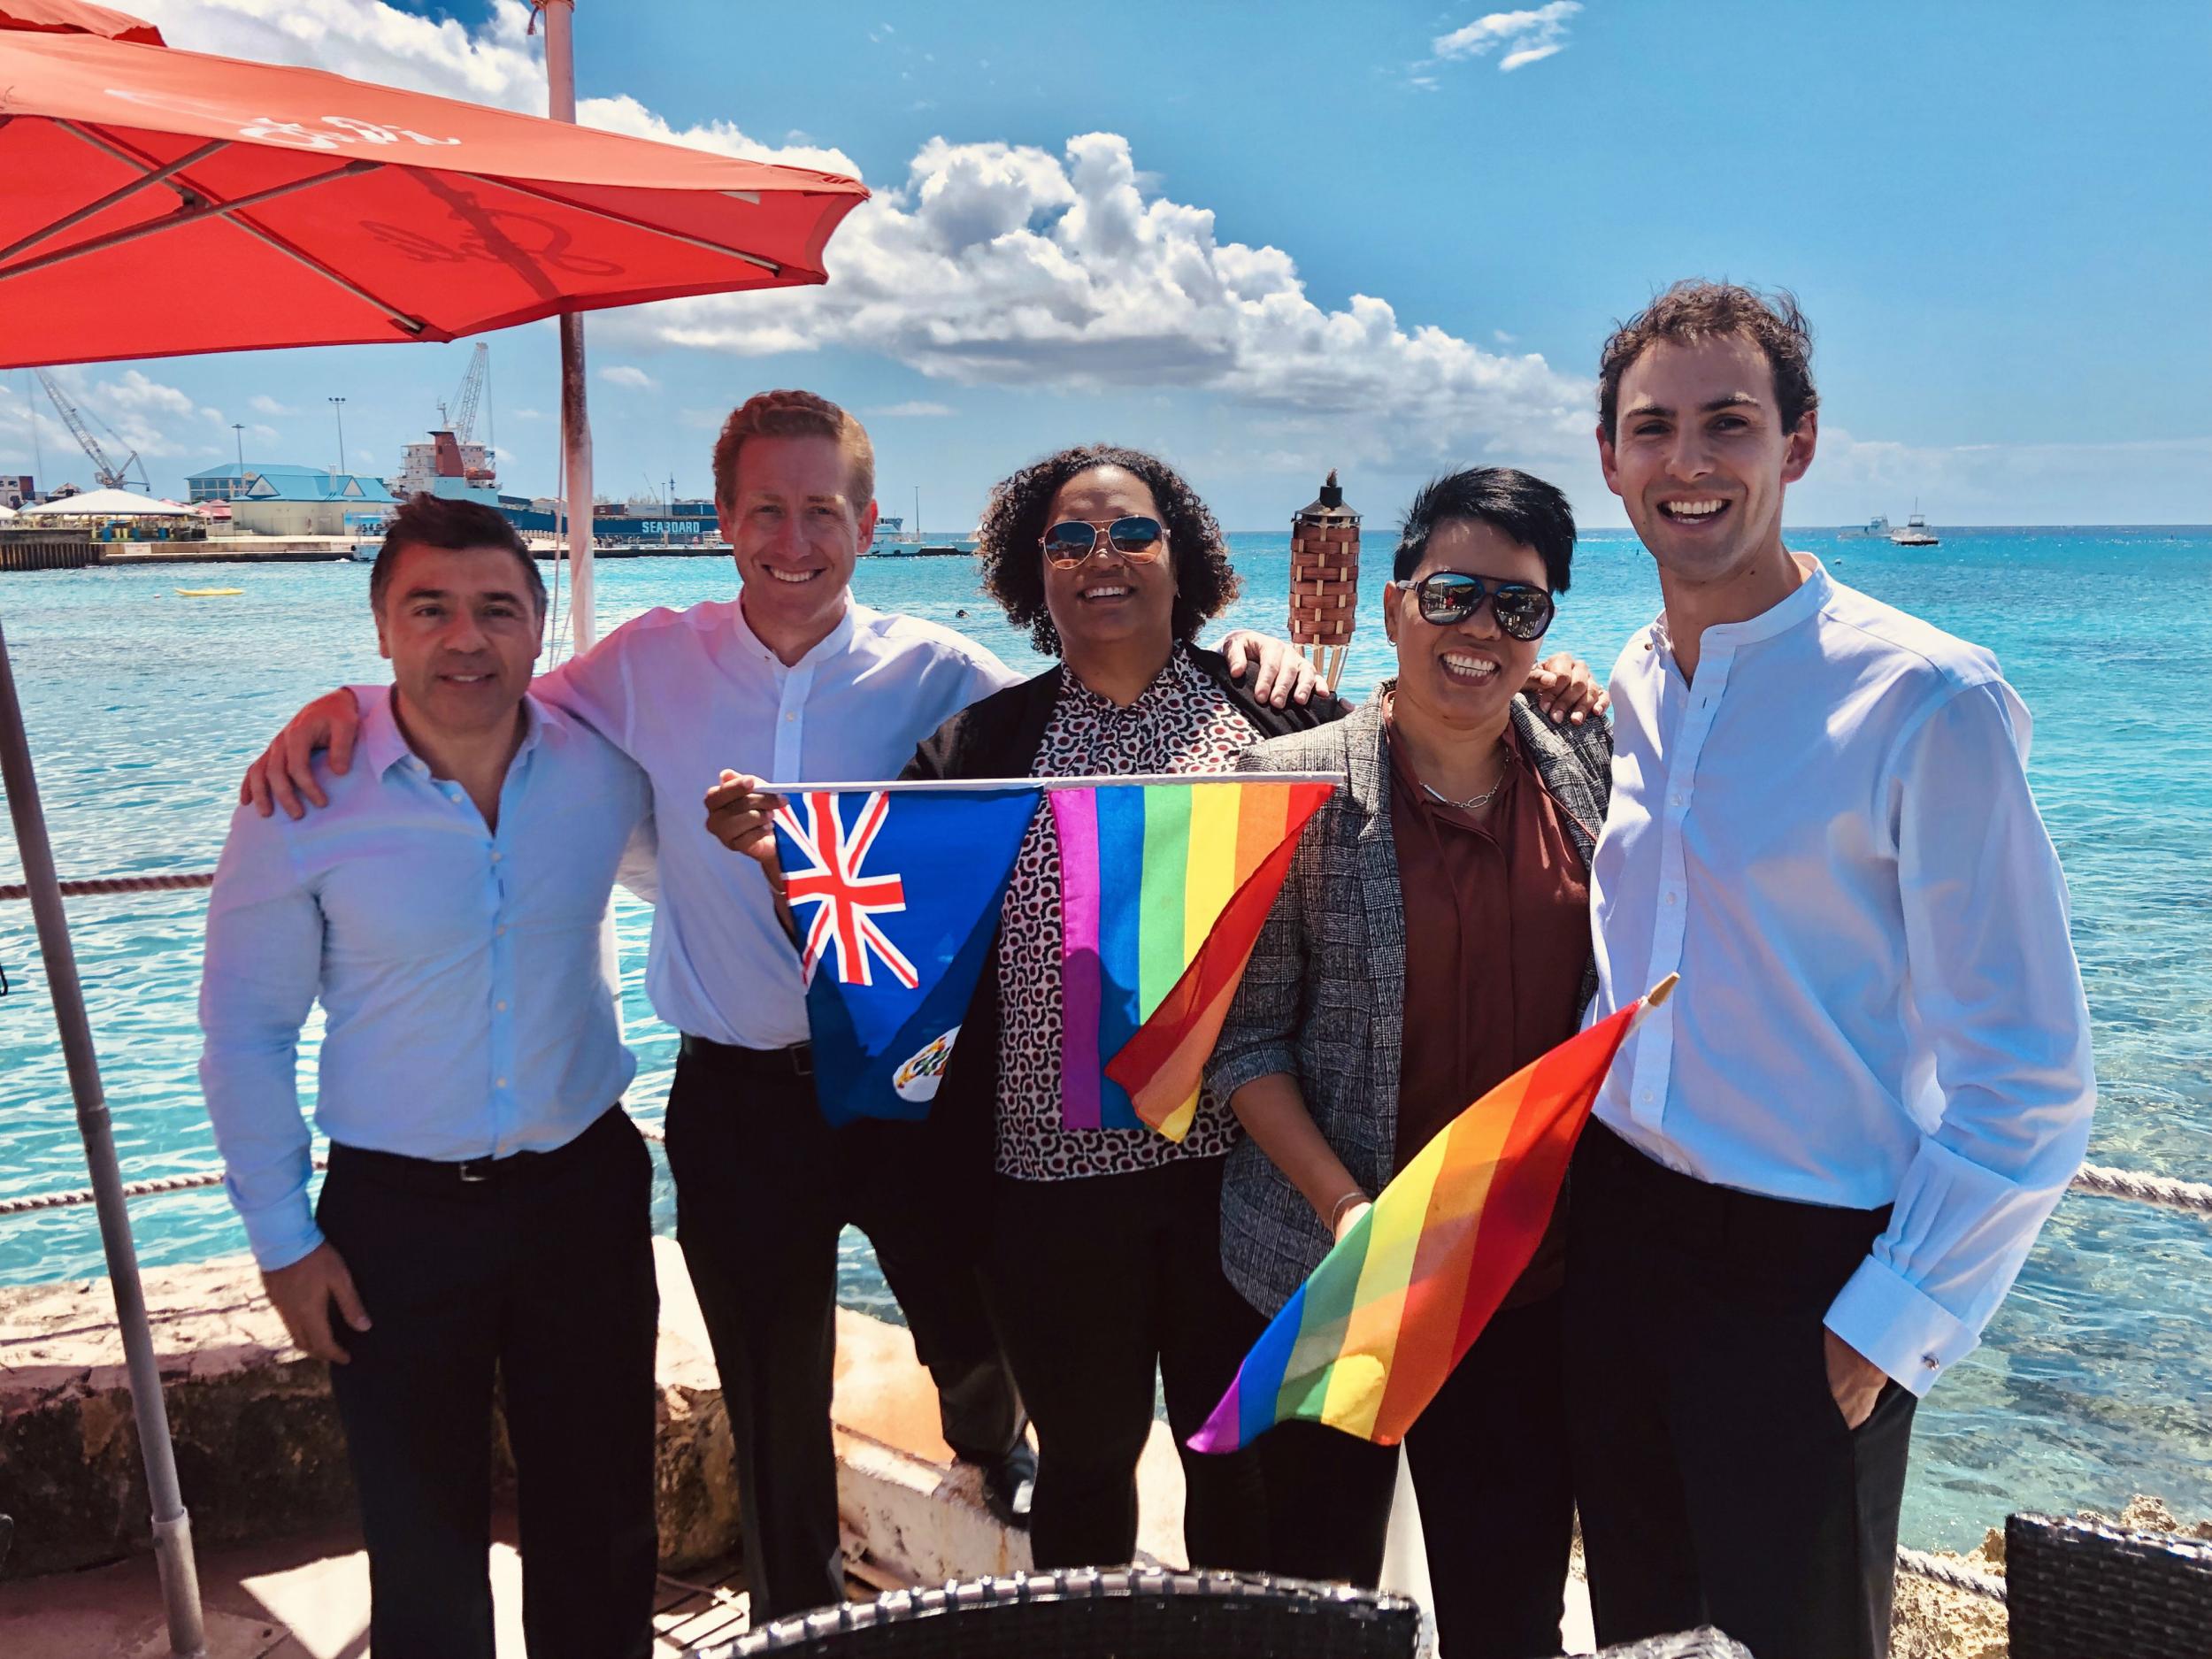 Cayman Islands legalises same-sex marriage in historic ruling